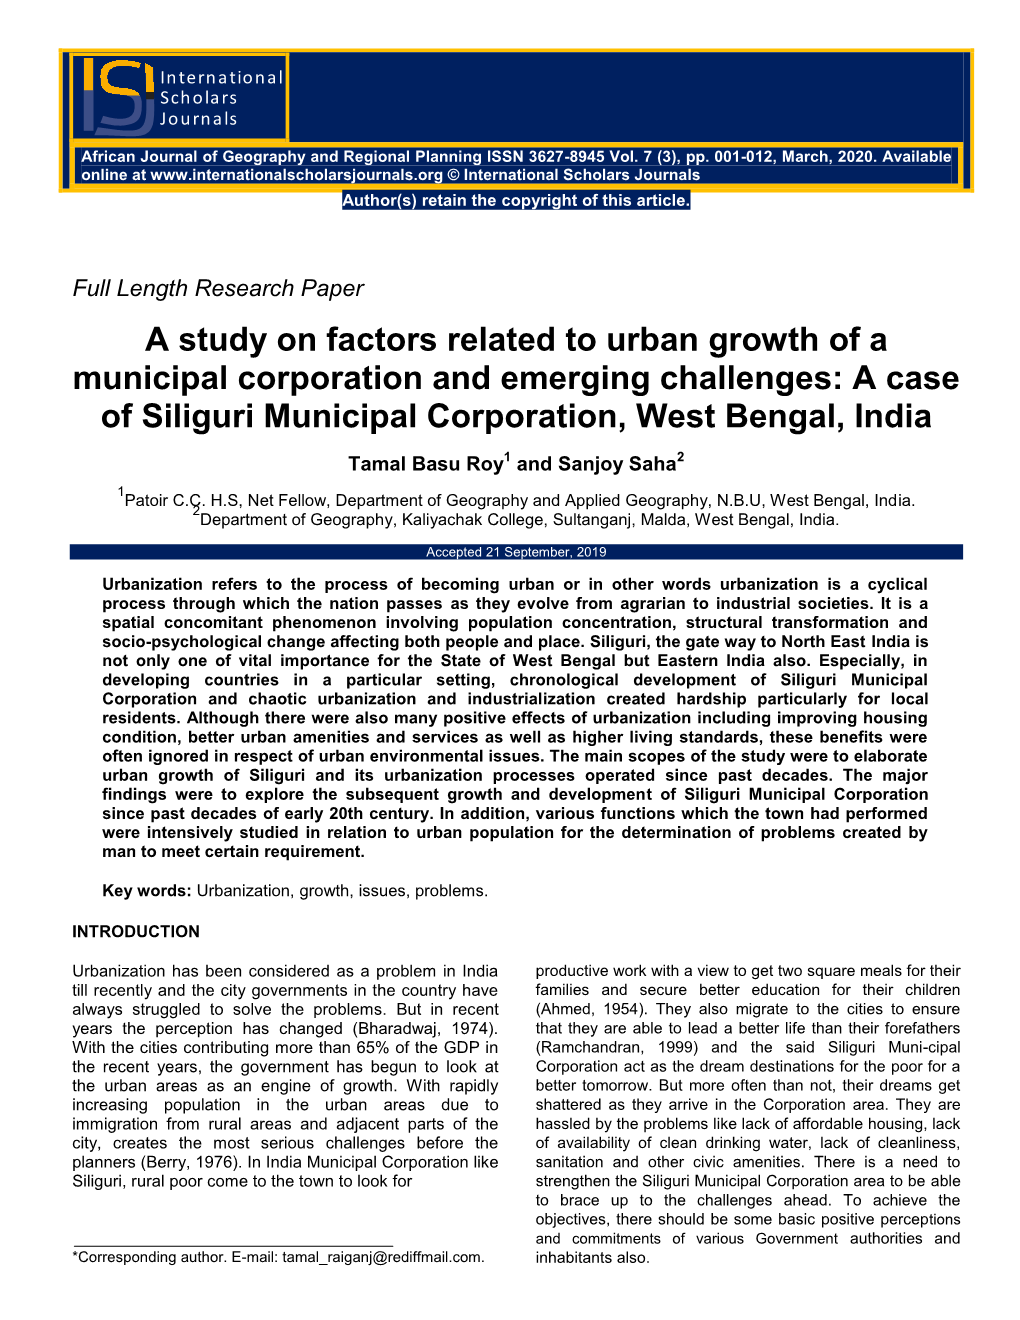 A Study on Factors Related to Urban Growth of a Municipal Corporation and Emerging Challenges: a Case of Siliguri Municipal Corporation, West Bengal, India